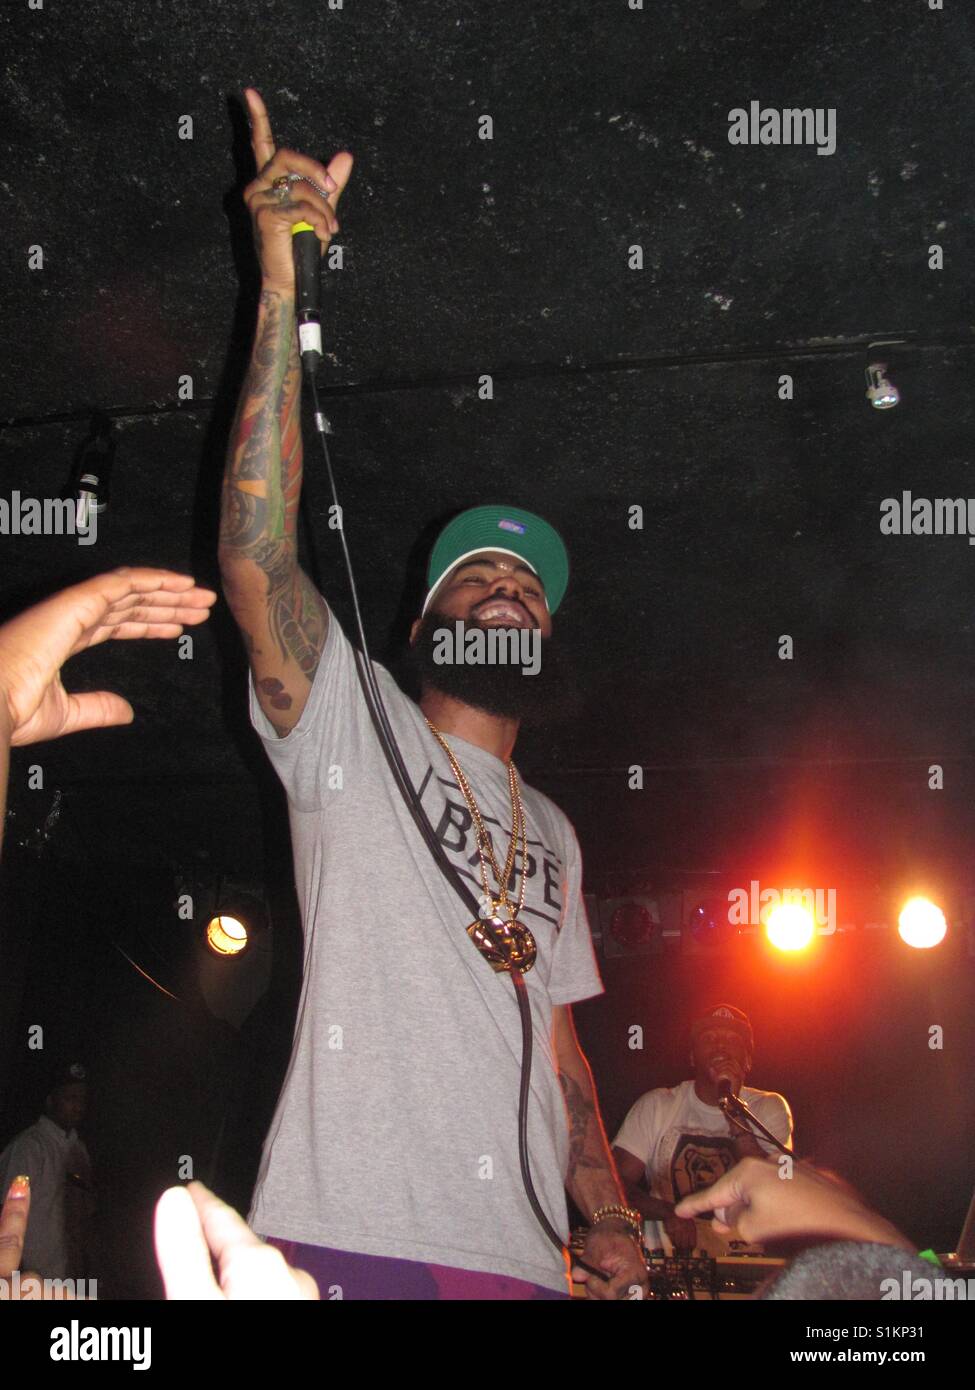 Stalley live on stage with fans and DJ Stock Photo